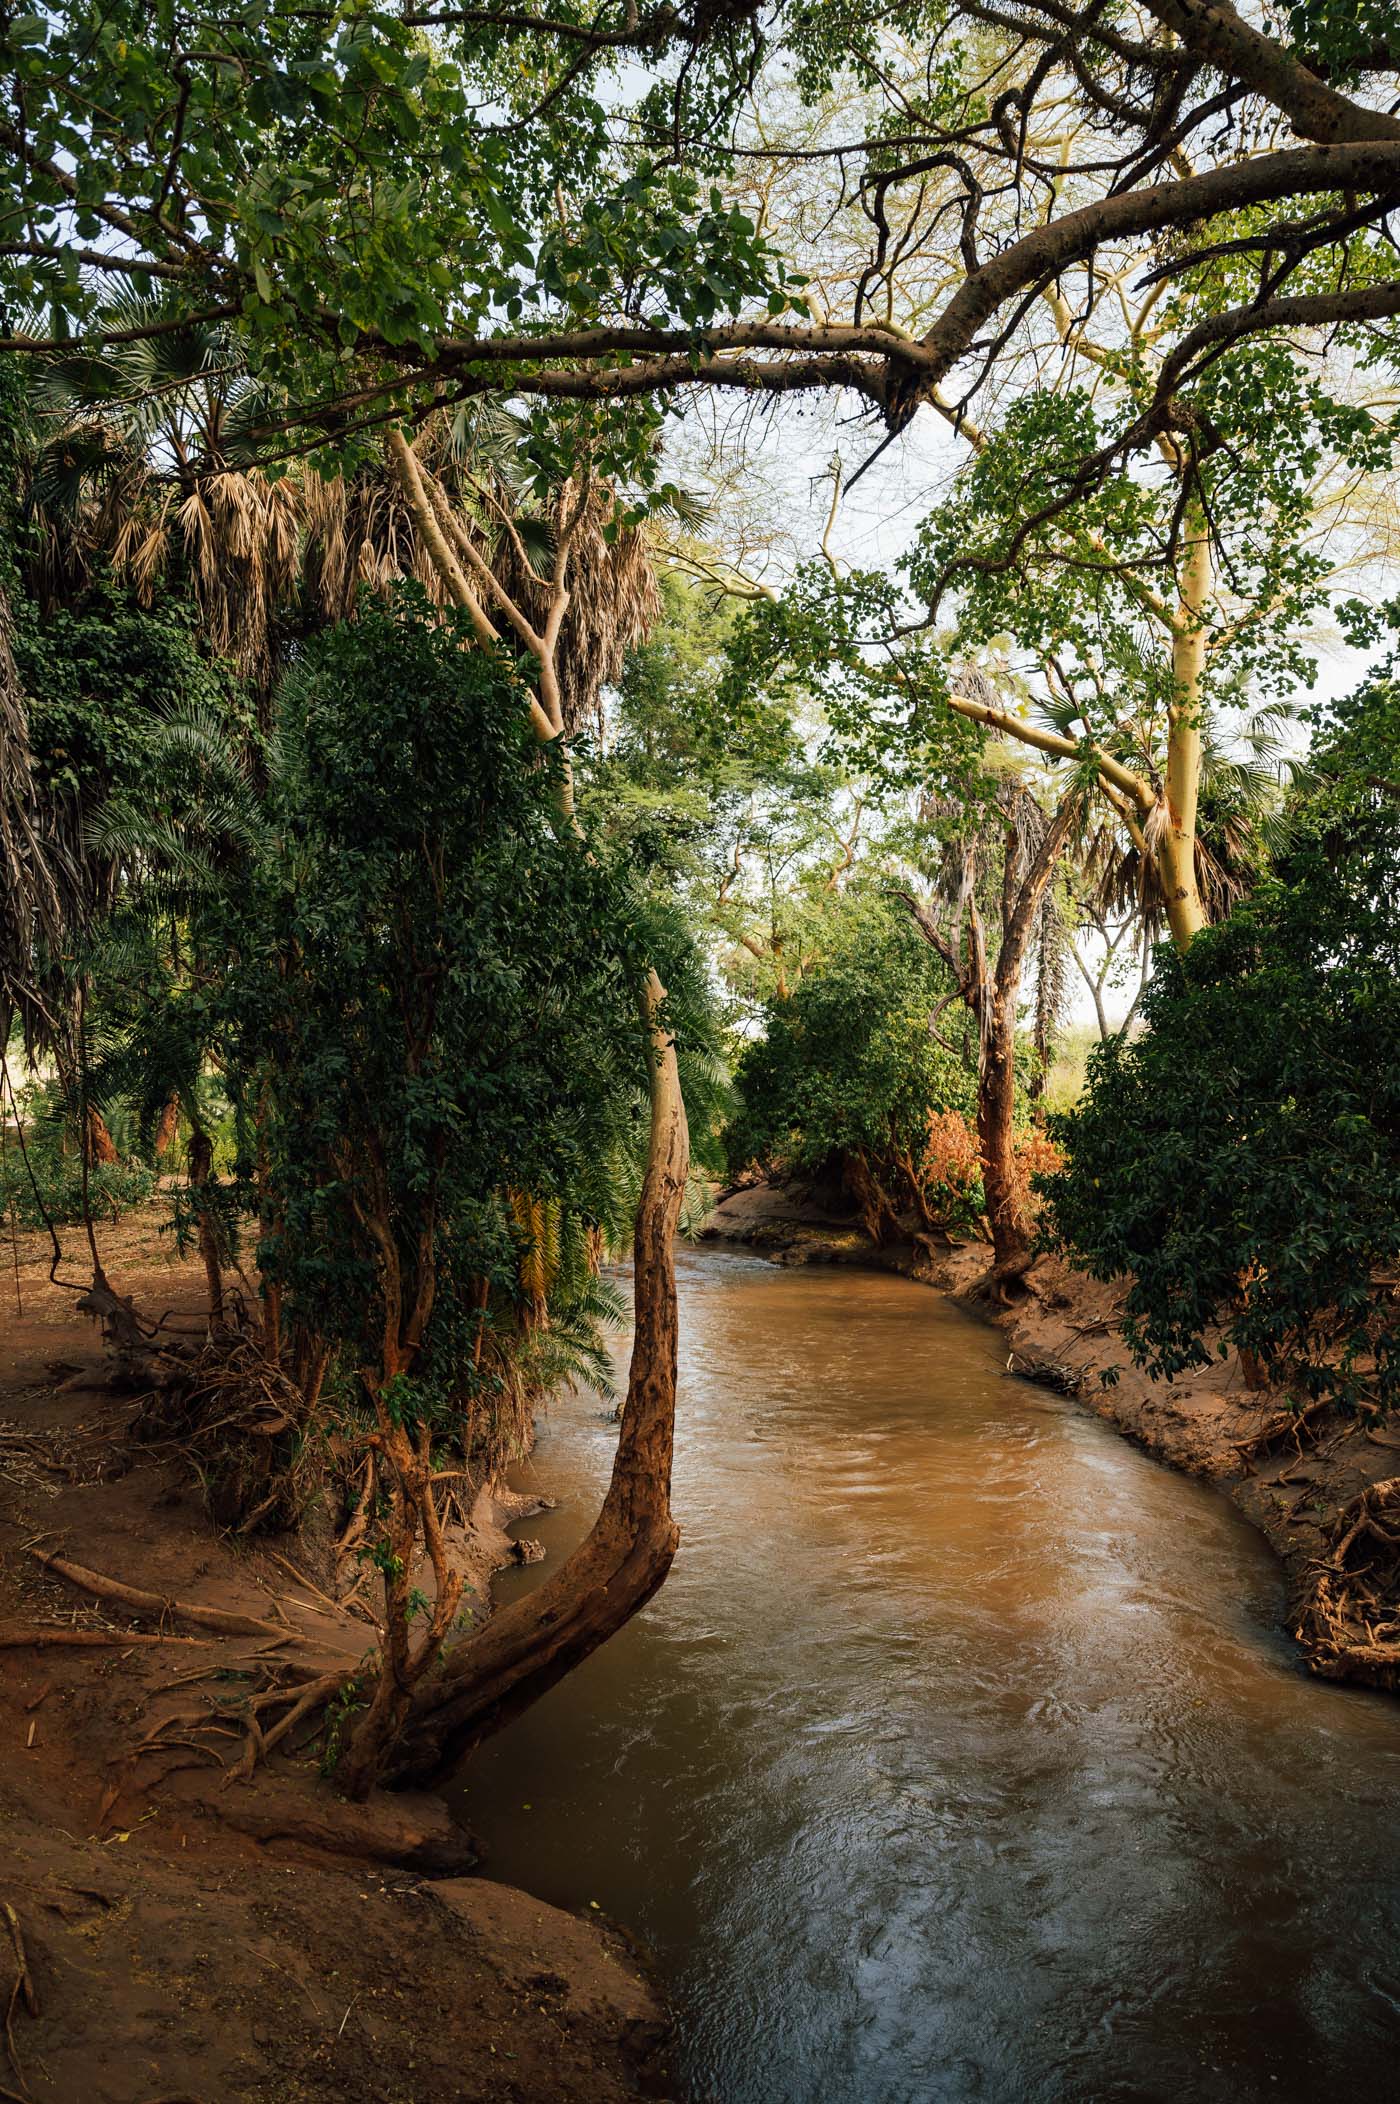 Tsavo River - one of the water lifelines of Tsavos National Parks